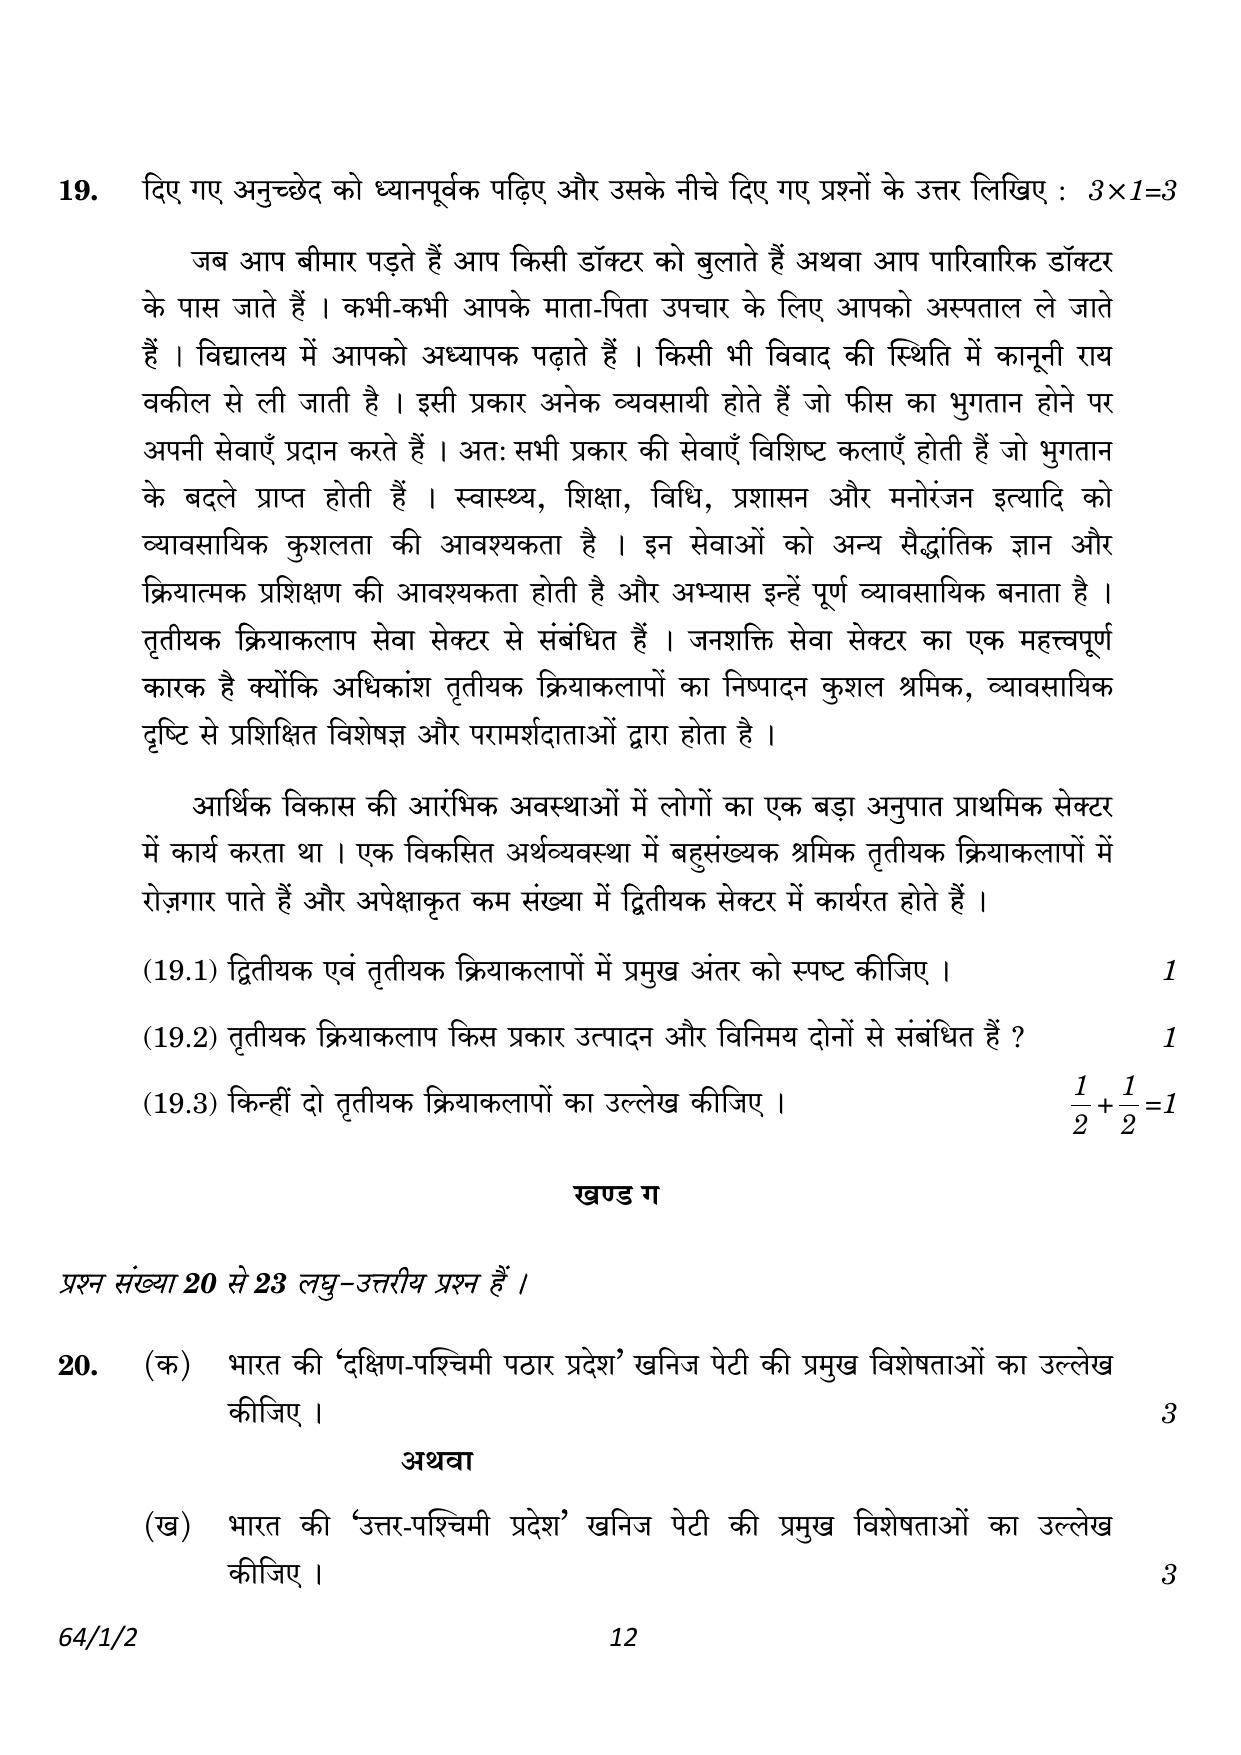 CBSE Class 12 64-1-2 Geography 2023 Question Paper - Page 12